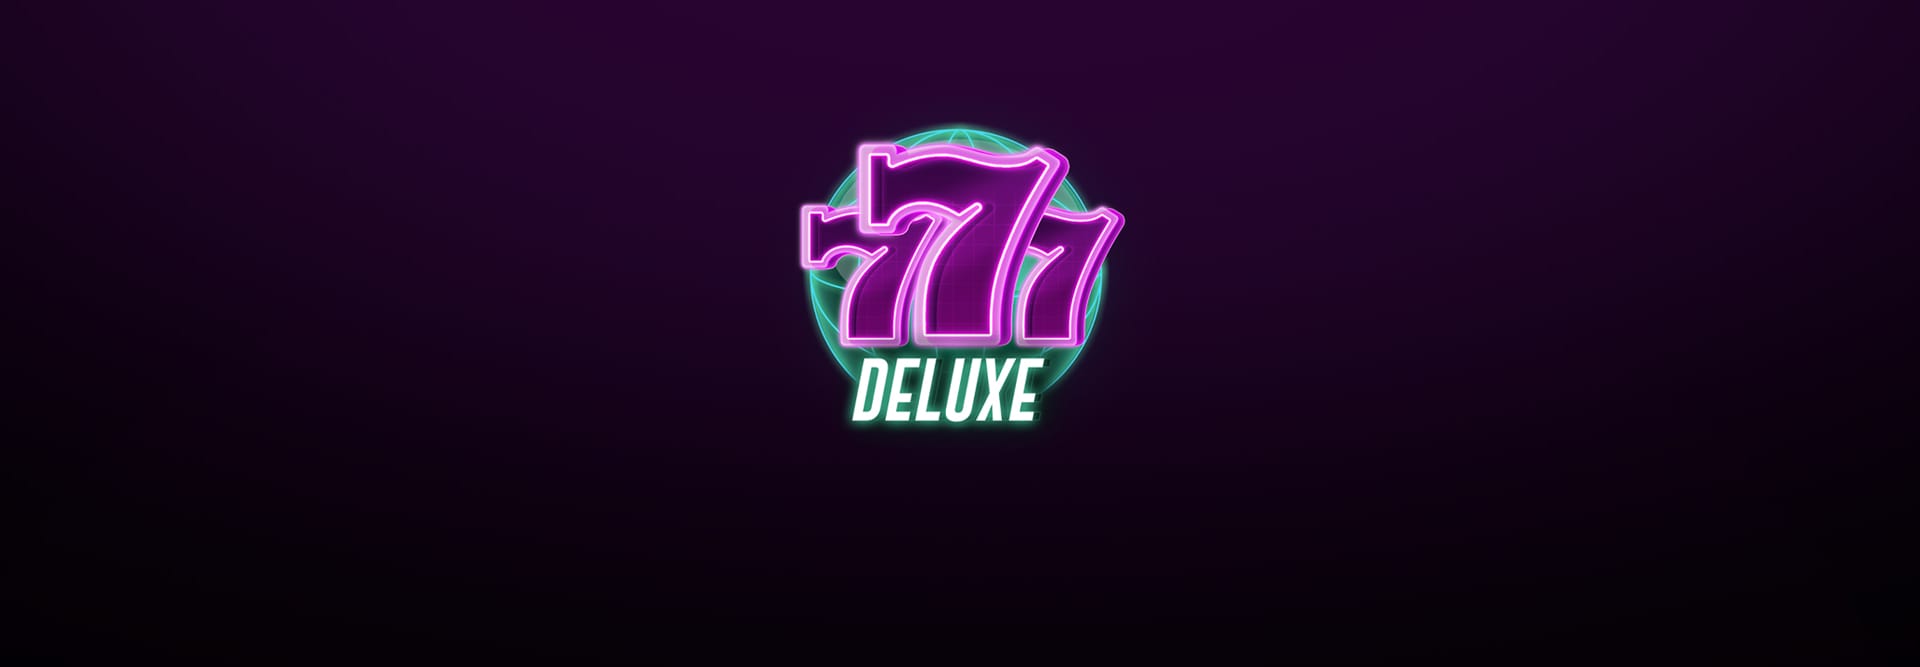 777 deluxe game banner